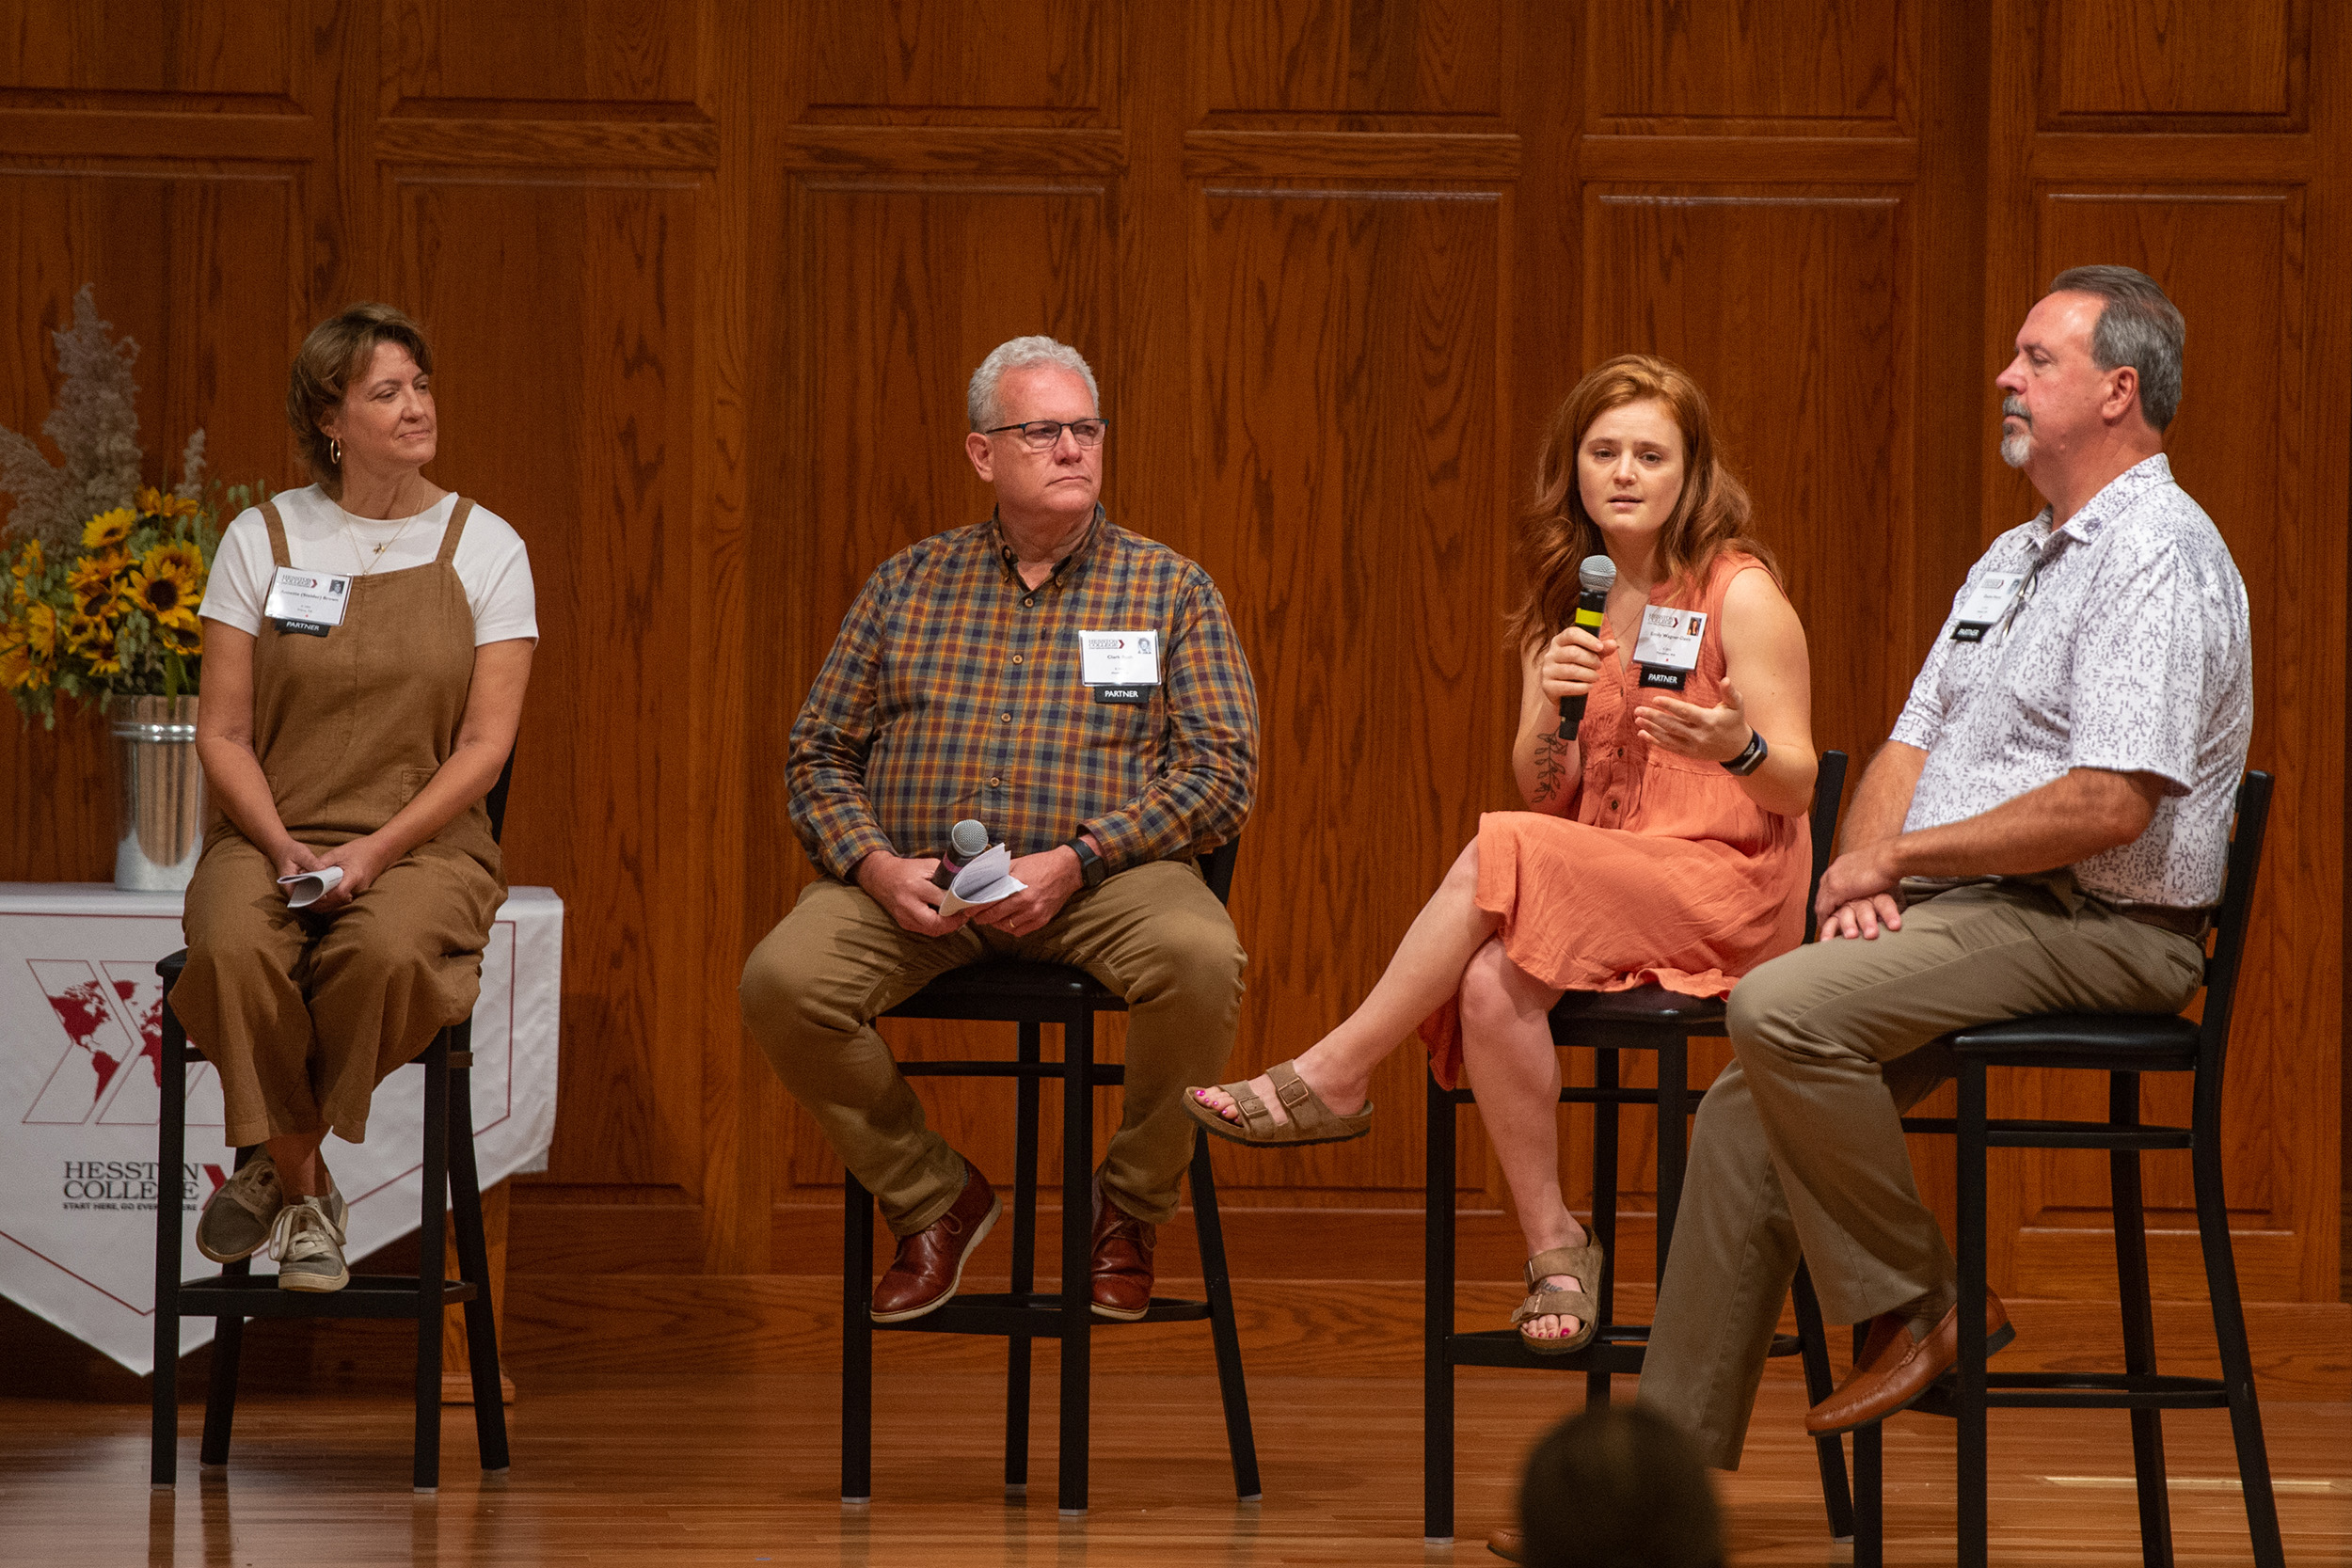 The business alumni panel discussion at Hesston College Homecoming 2022